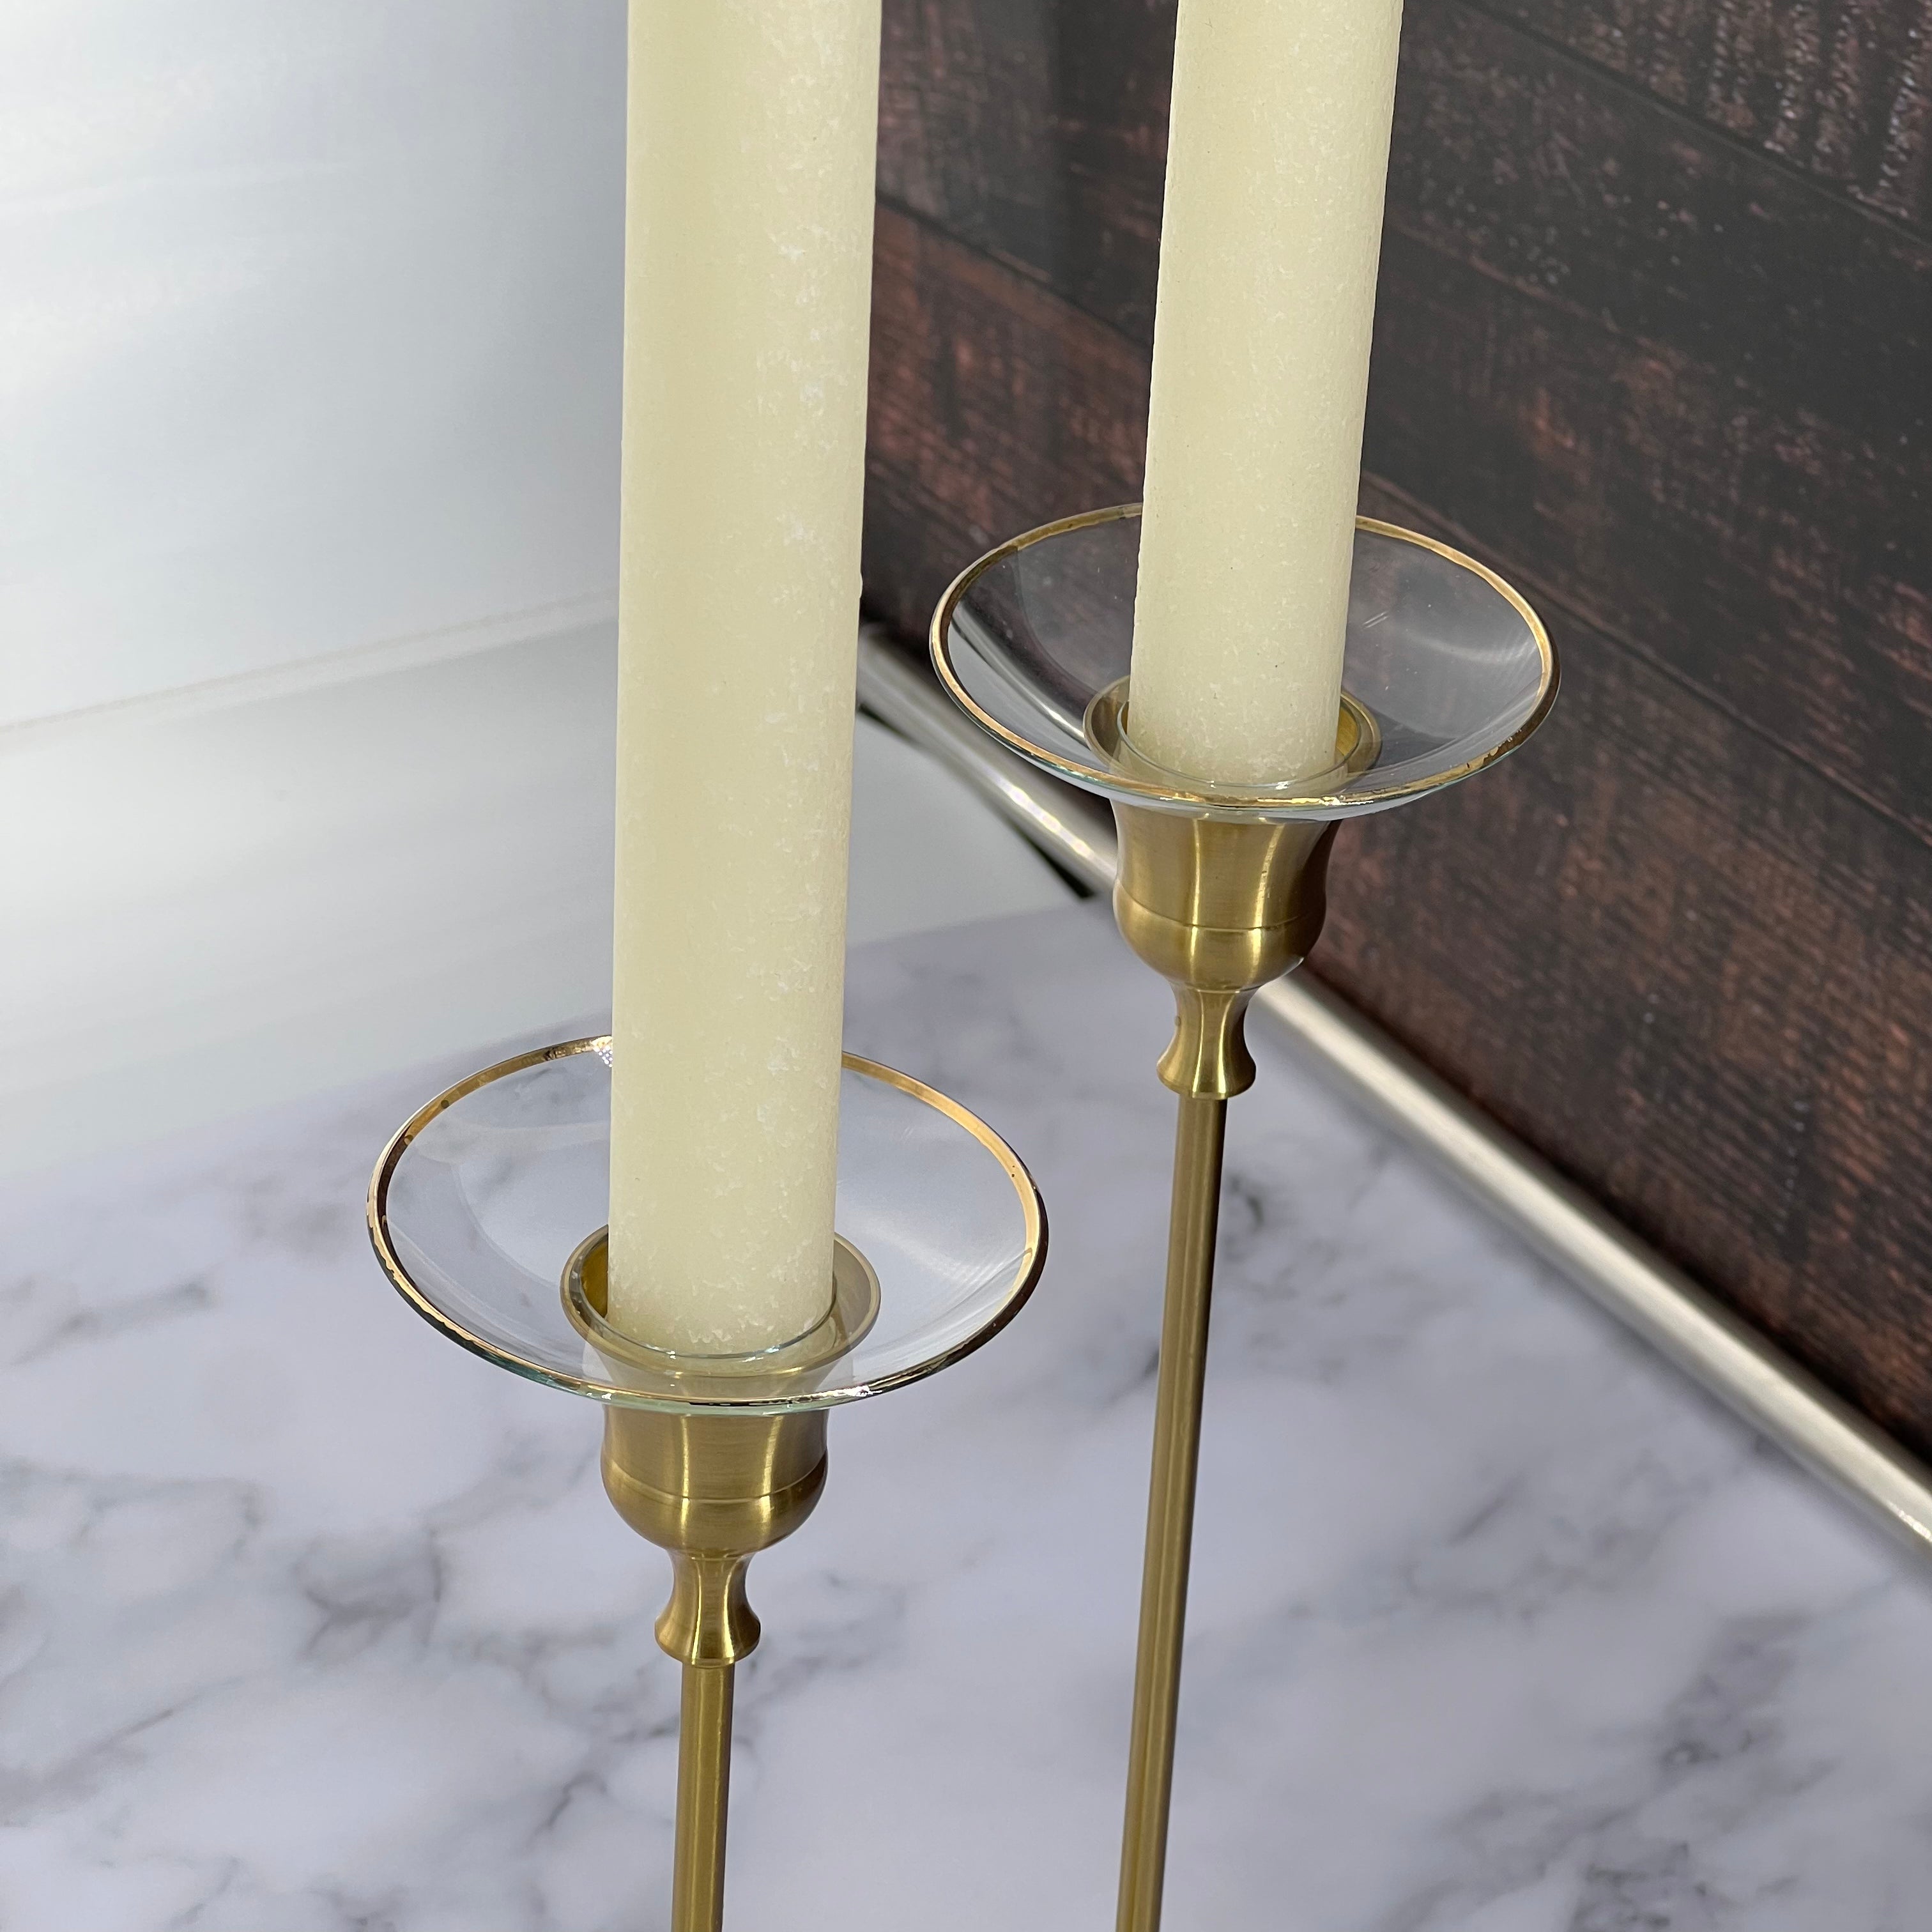 VGEUNA 4 Pieces Bent Glass Candle Bobeches, Taper Candle Wax Catcher Rings,  Bobeches for Candlestick Holders (Scallop)